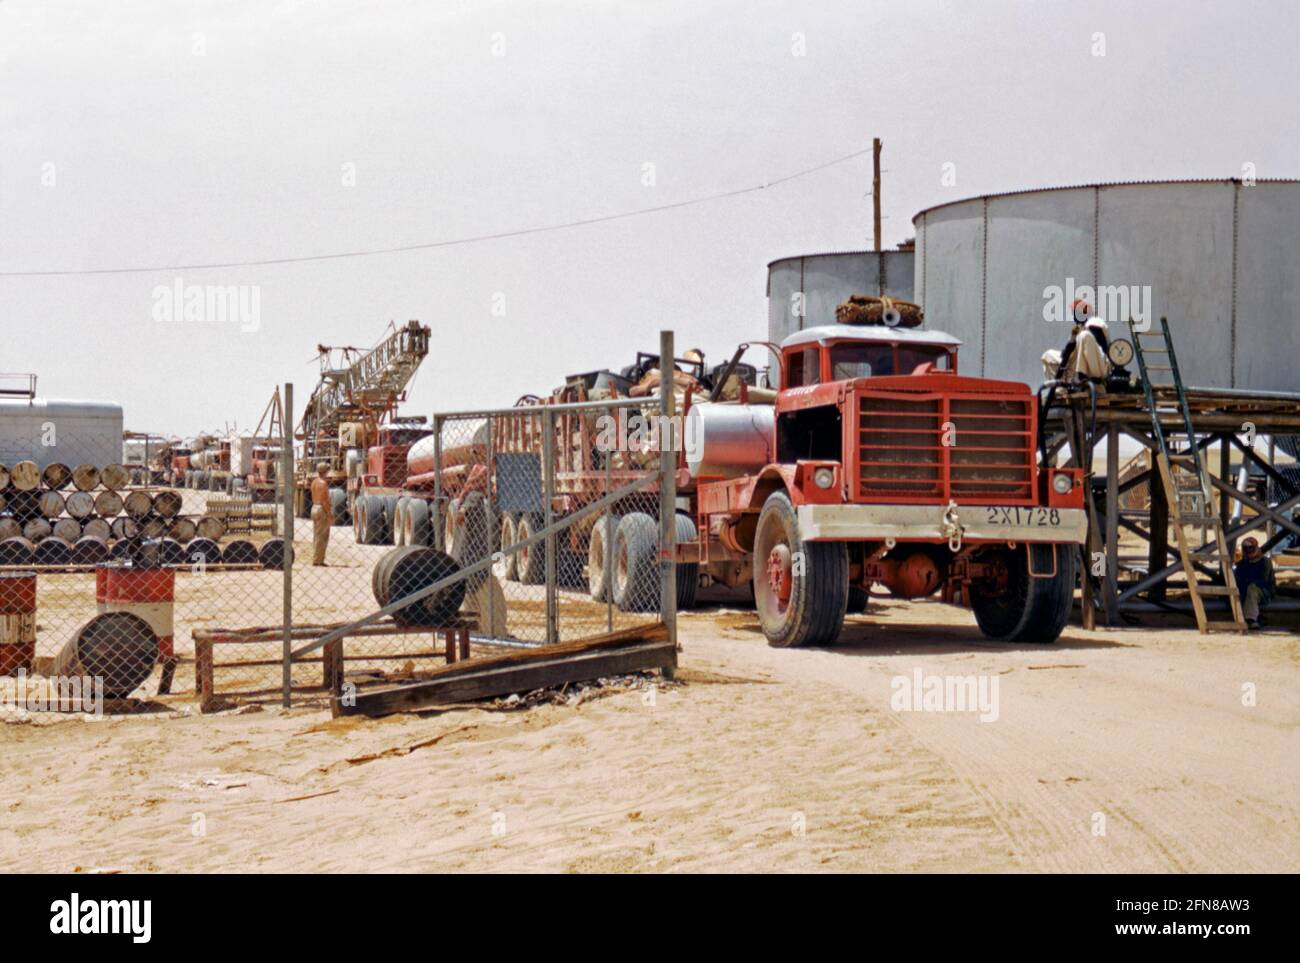 Oil exploration by the petroleum company Aramco in Saudi Arabia c. 1955. Here a convoy of trucks leaves a depot to head out to exploration sites. The vehicles carry camping equipment, mobile homes/offices and test-drilling rigs. Water tankers form part of the convoy. Saudi Aramco (now the Saudi Arabian Oil Company and formerly Arabian-American Oil Company) is a Saudi Arabian petroleum and natural gas company based in Dhahran. . In 1944 the company name was changed from California-Arabian Standard Oil Company to Arabian-American Oil Company (or Aramco) – a vintage 1950s photograph. Stock Photo